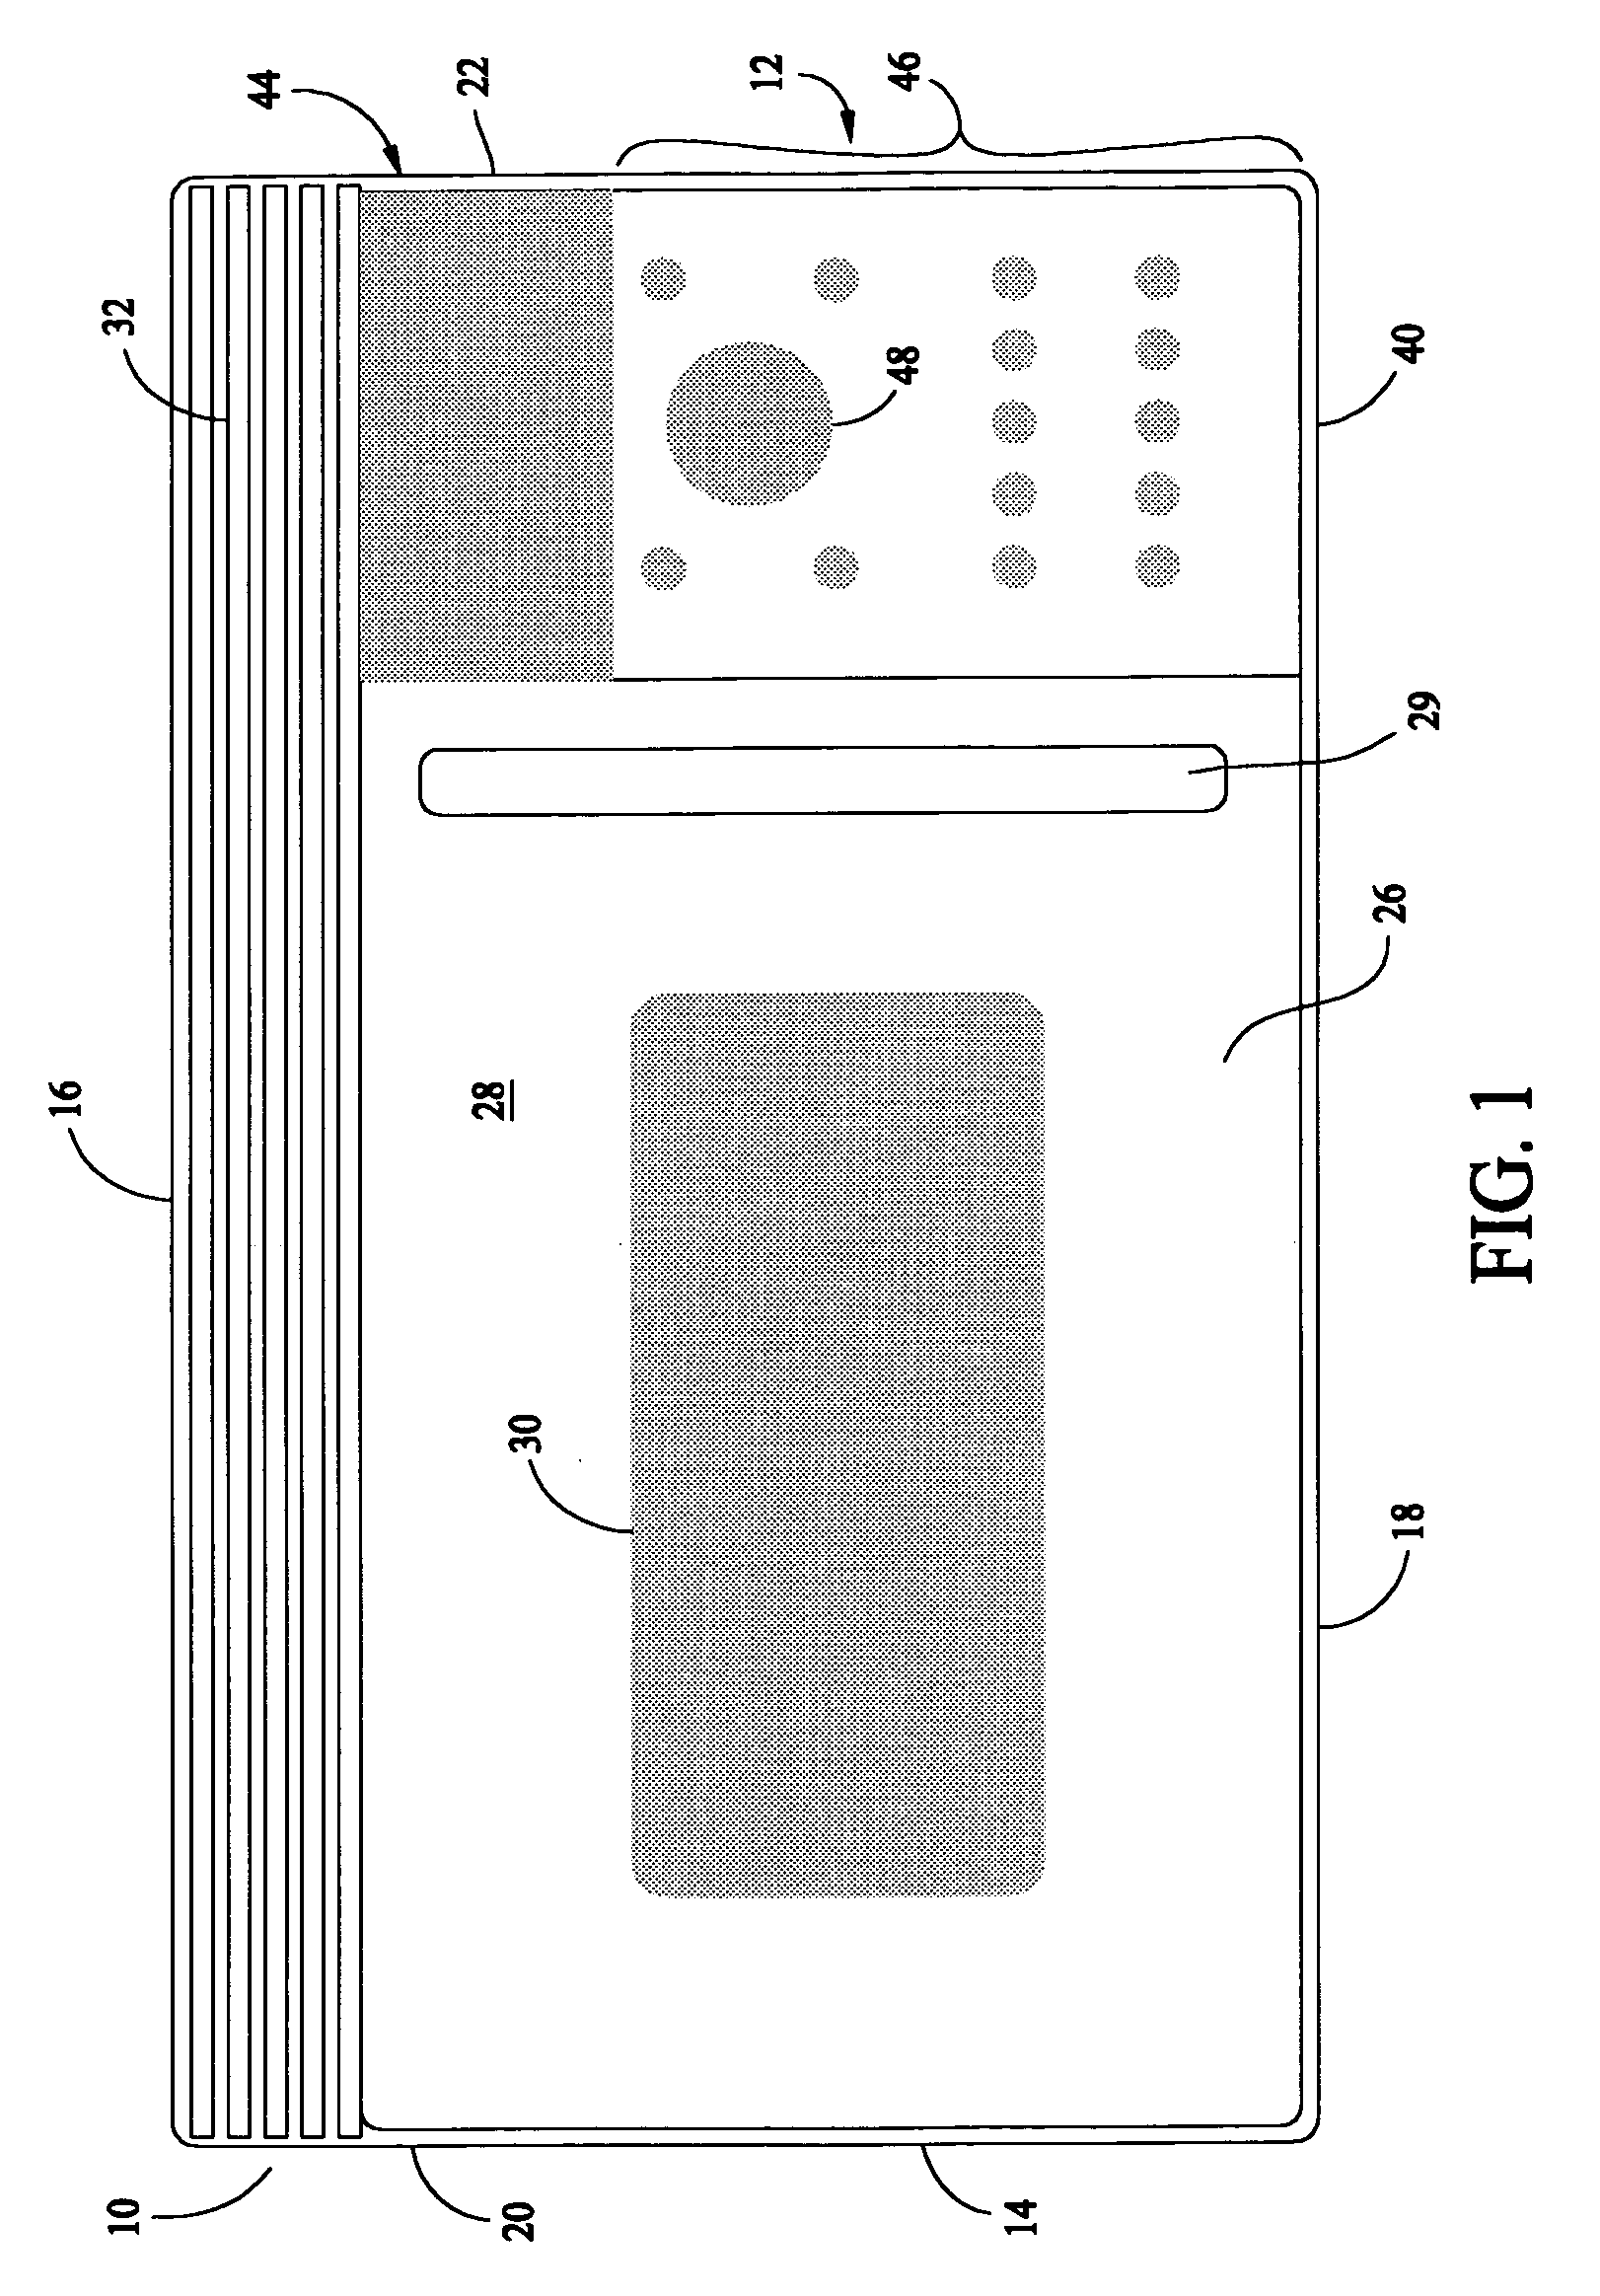 Methods and apparatus for rotary dial user entry in an appliance